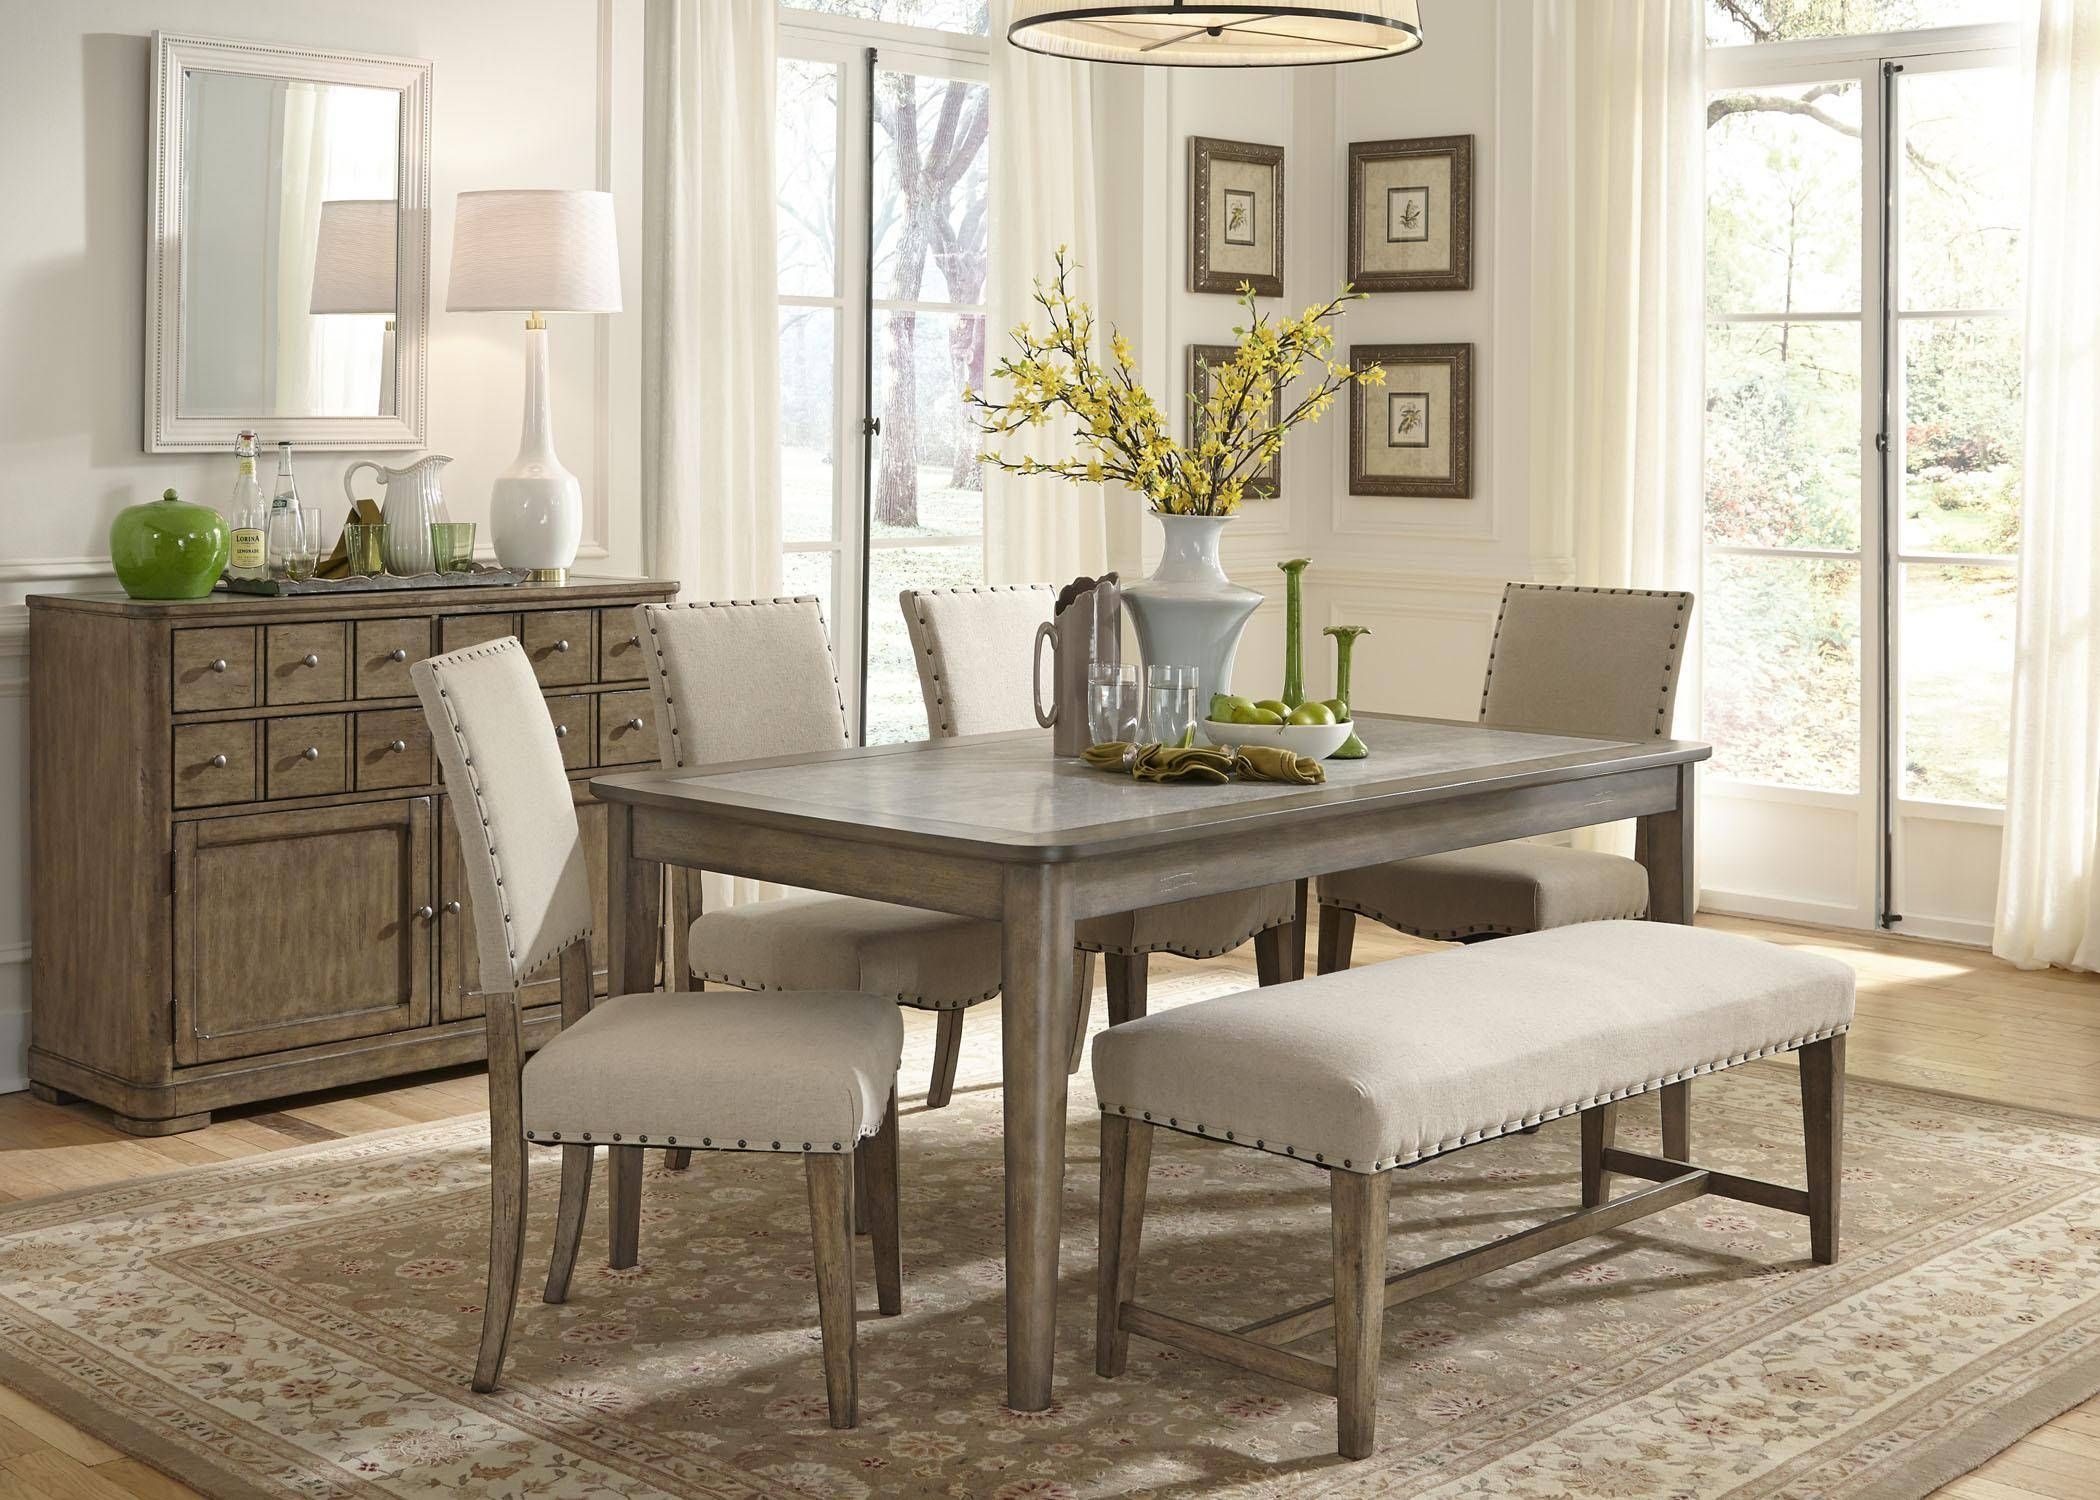 Dining Room Table With Sofa Bench